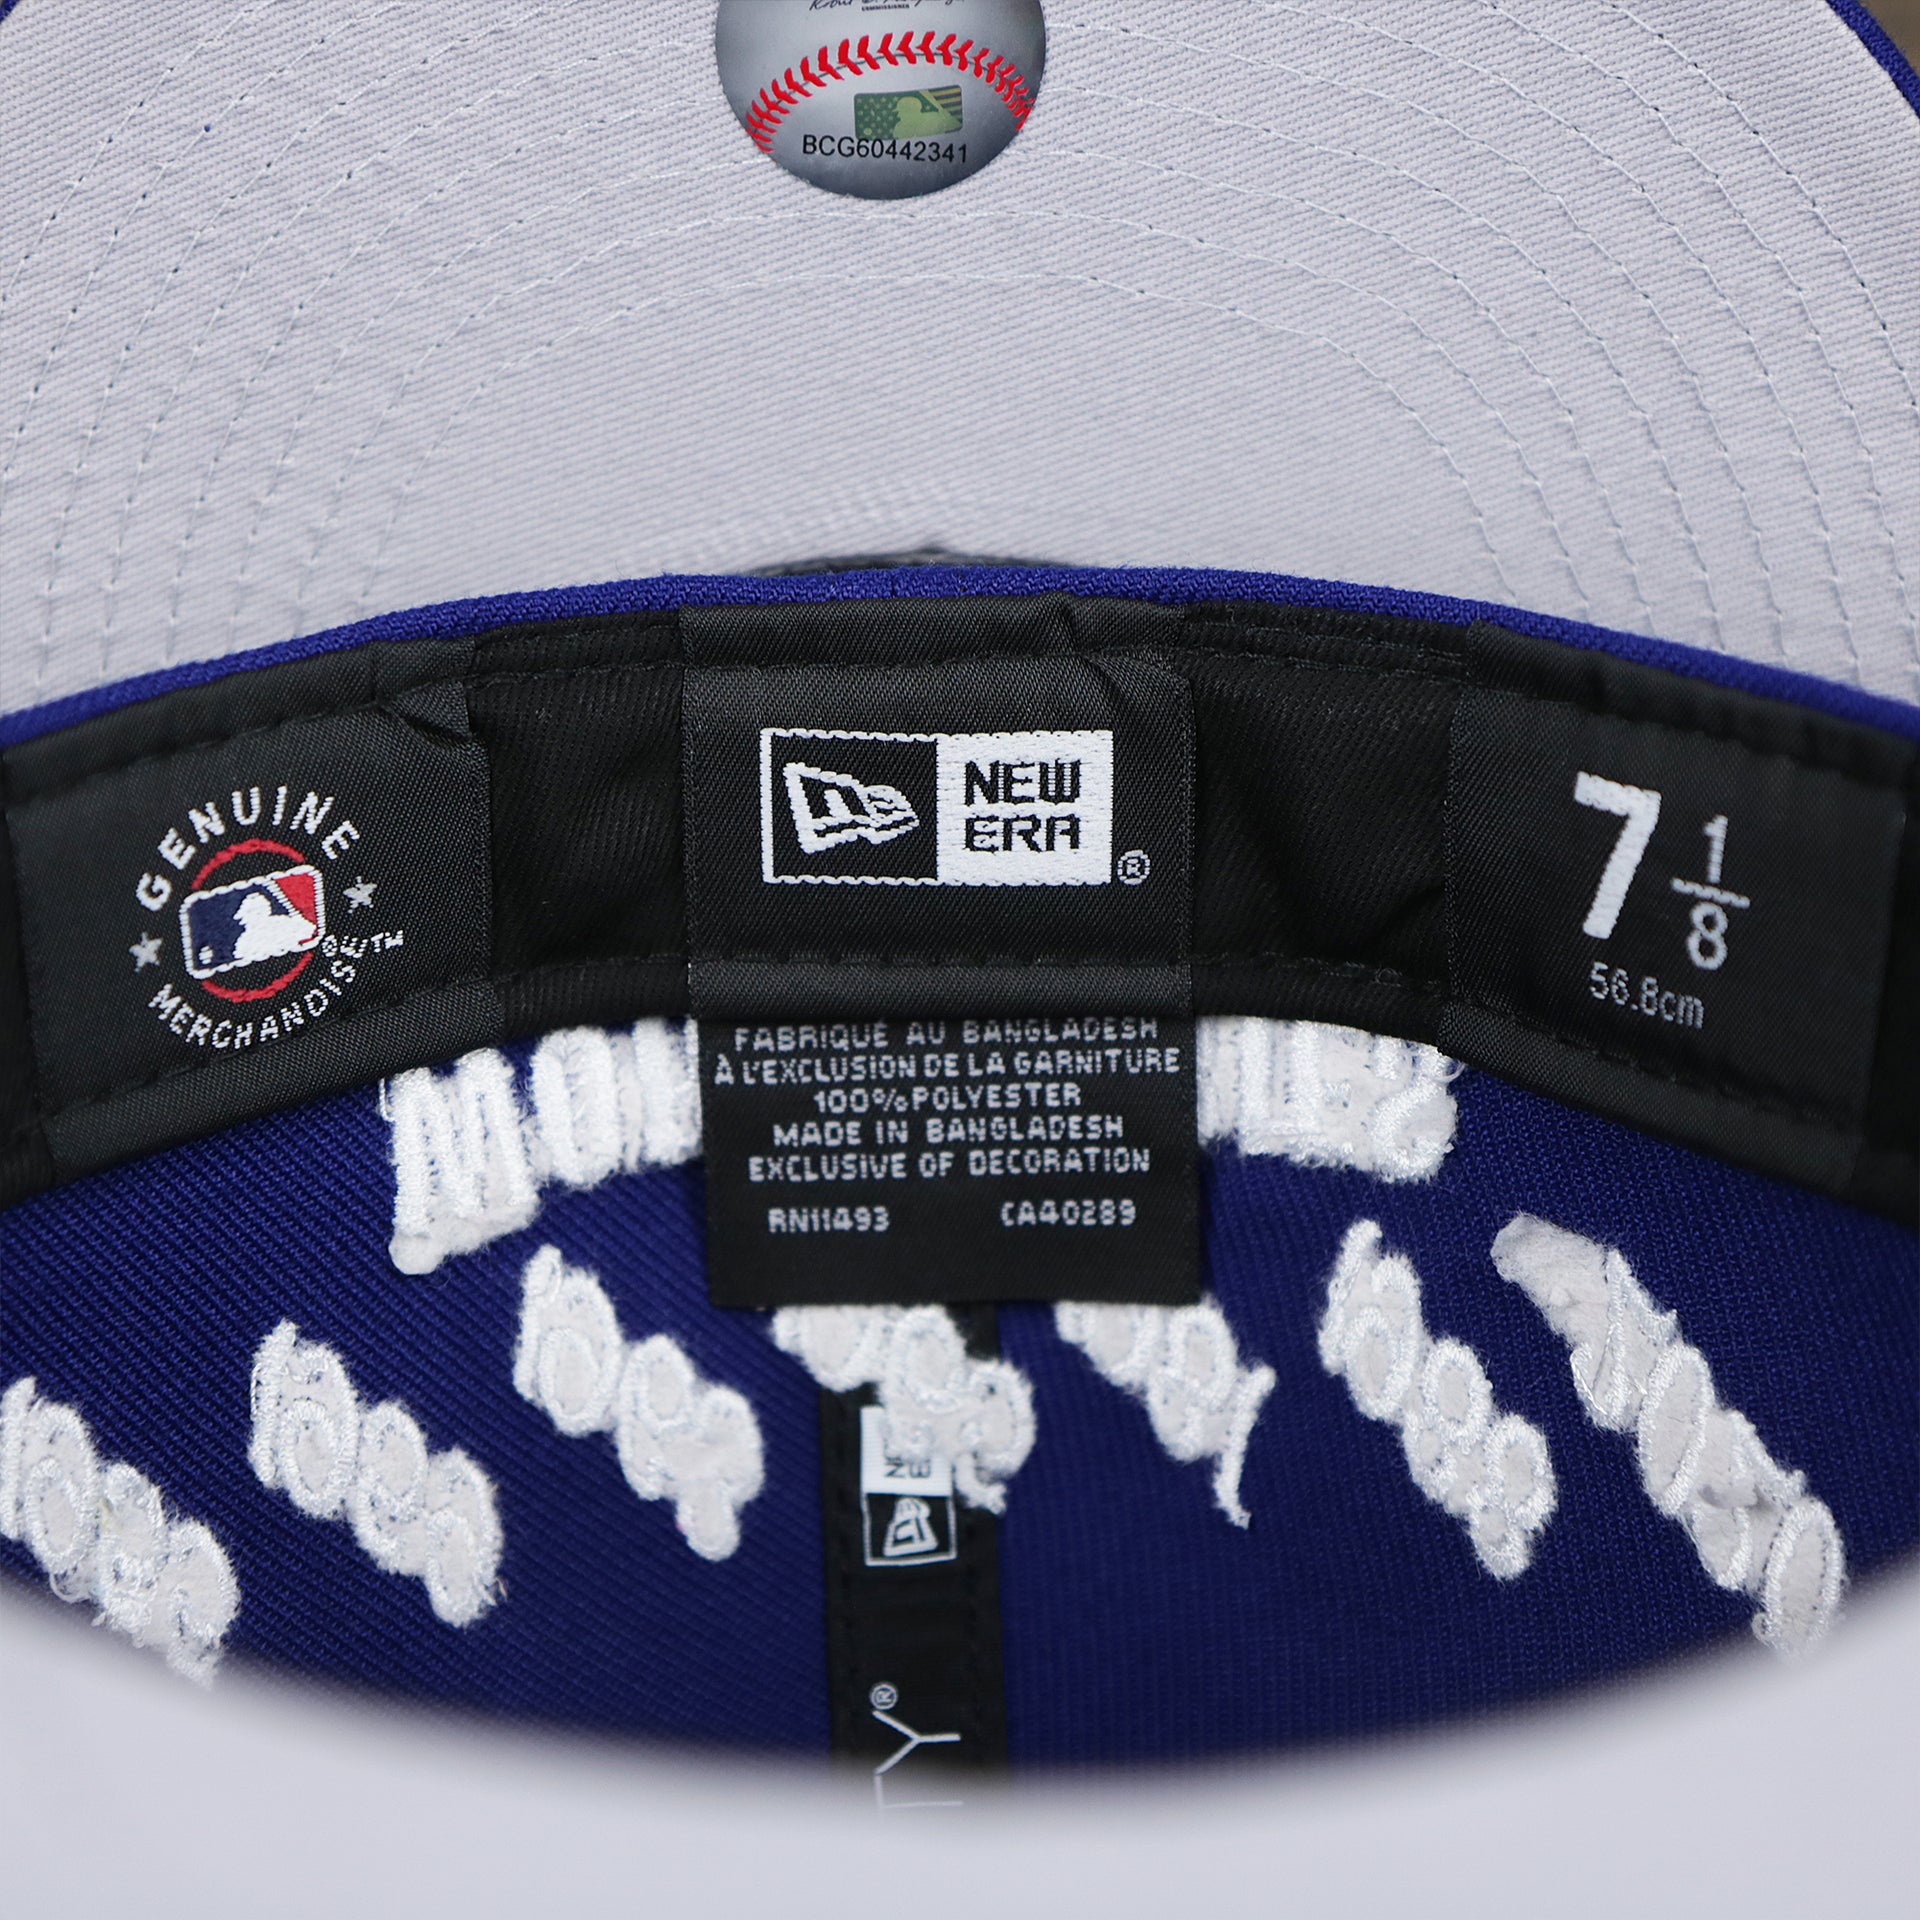 The Tags on the Los Angeles Dodgers Crown Champions Gray Bottom World Championship Wins Embroidered Fitted Cap | Royal Blue 59Fifty Cap